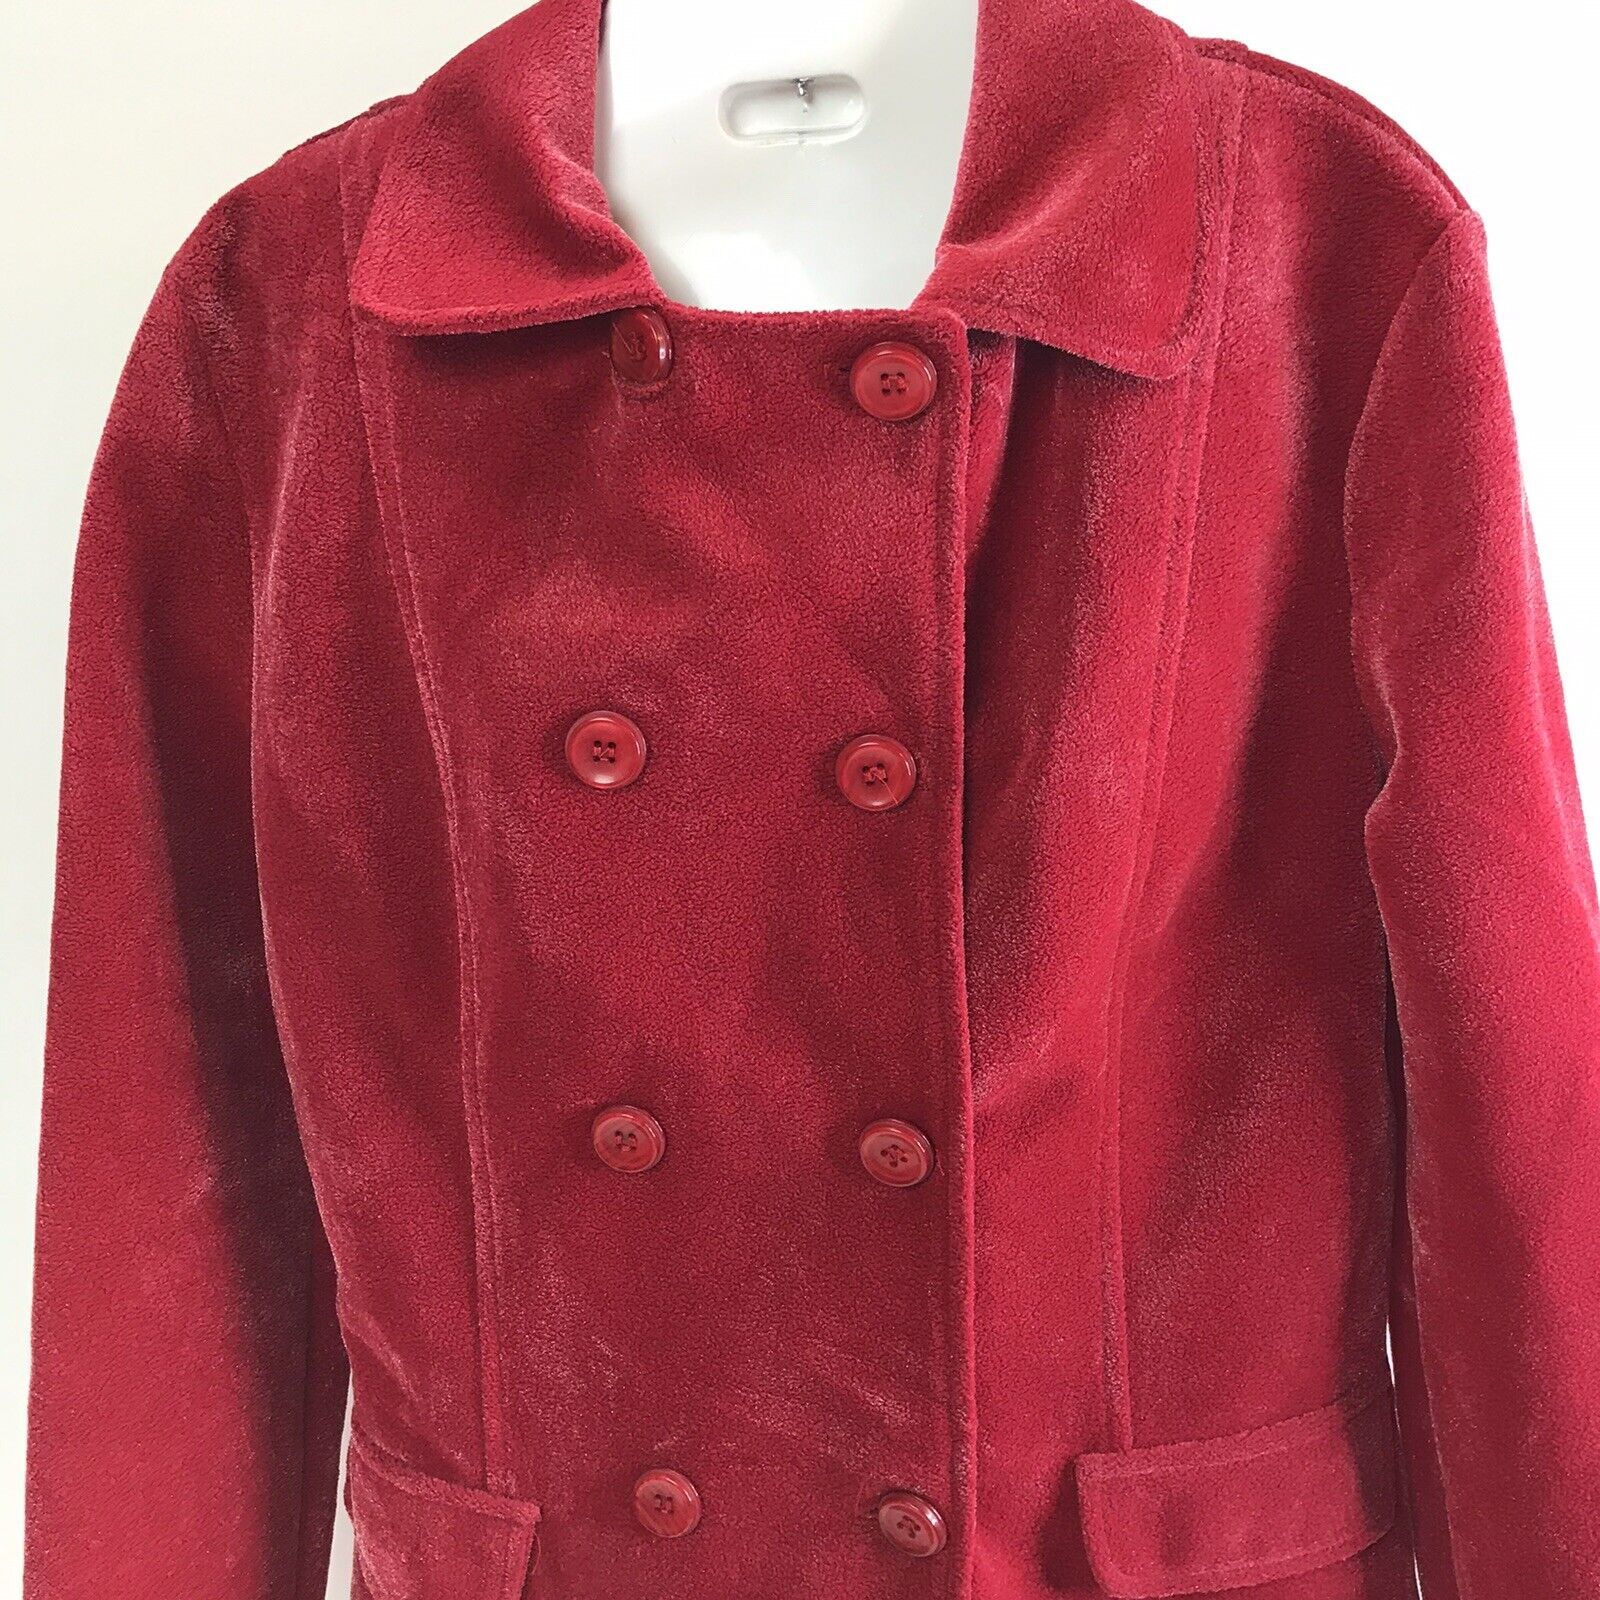 Primary image for VTG 90s Misope Red Double Breasted Jacket Soft Shimmer Fabric USA Made